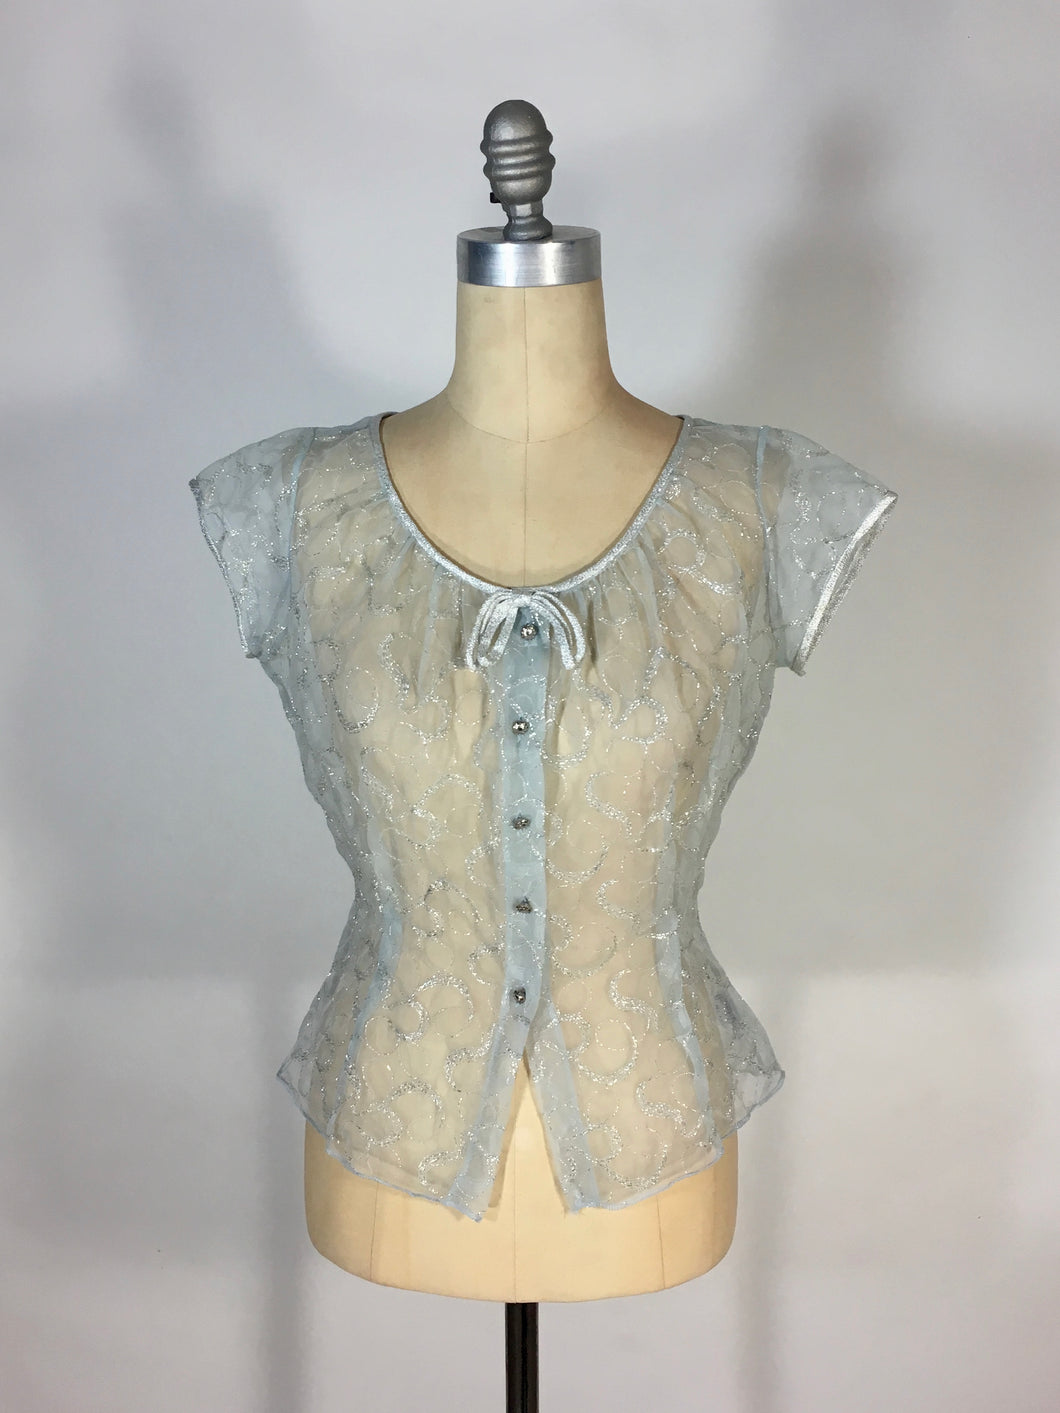 1950’s ice blue and silver sheet lacy nylon blouse with bow detail by Judy Bond